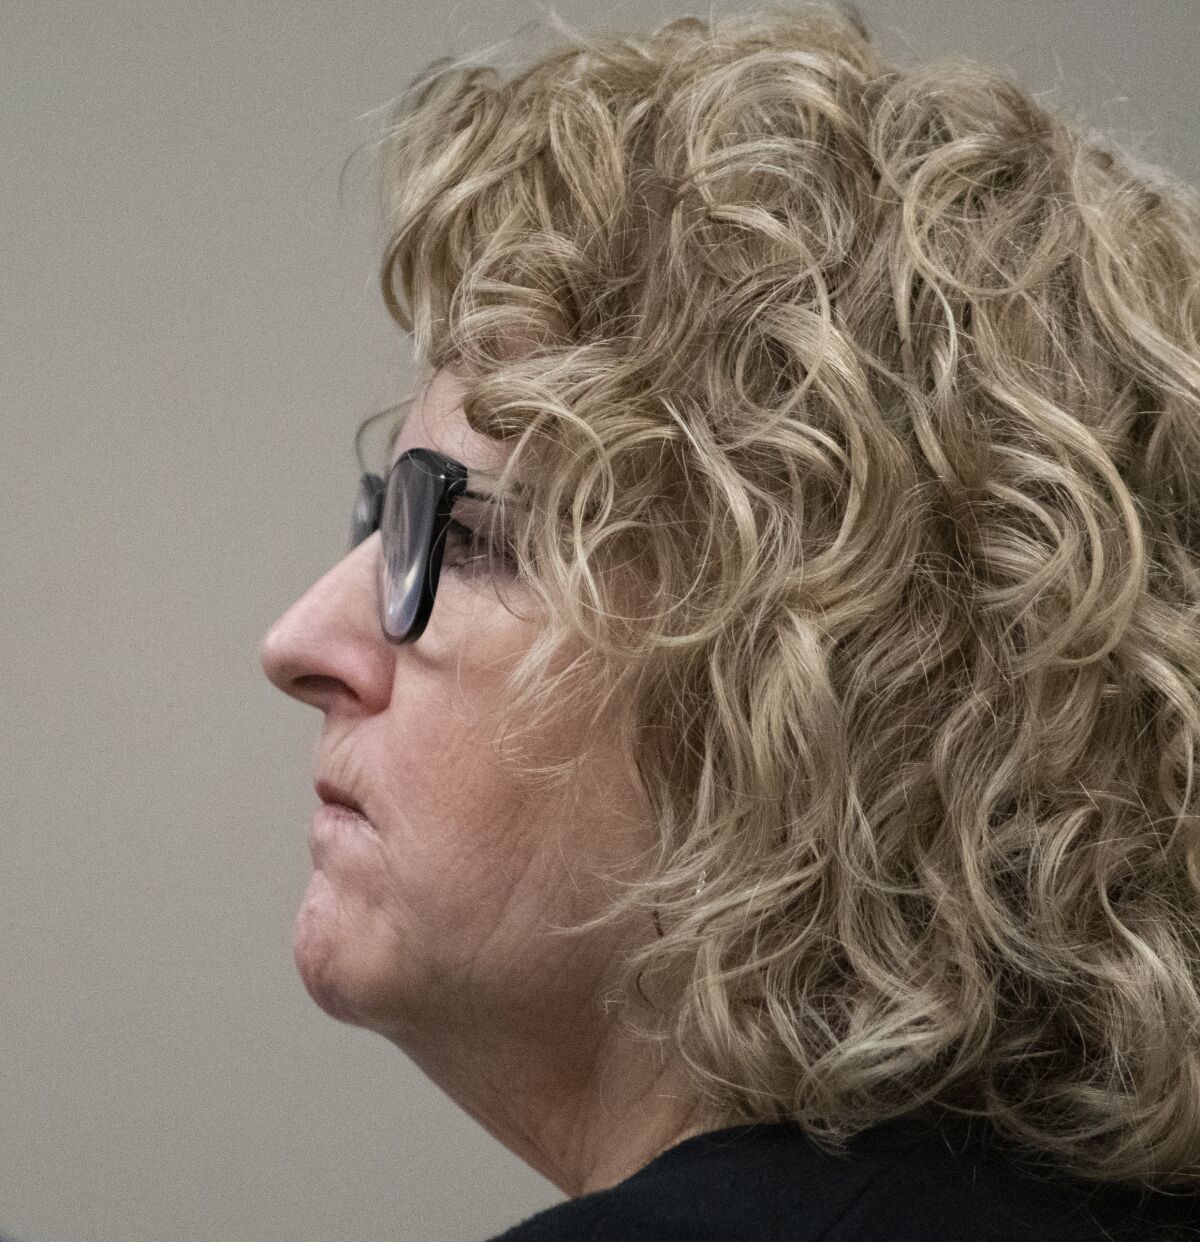 Former Michigan State University womens gymnastics coach Kathie Klages listens to testimony Tuesday, Feb. 11, 2020, at Veterans Memorial Courthouse in Lansing, Mich., where she's on trial for two counts of lying to police during a 2018 interview. Klages denies that two gymnasts told her in 1997 that Larry Nassar, a former MSU sports medicine doctor who abused hundreds of girls and young women under the guise of medical treatment, had sexually abused them. (Matthew Dae Smith/Lansing State Journal via AP)